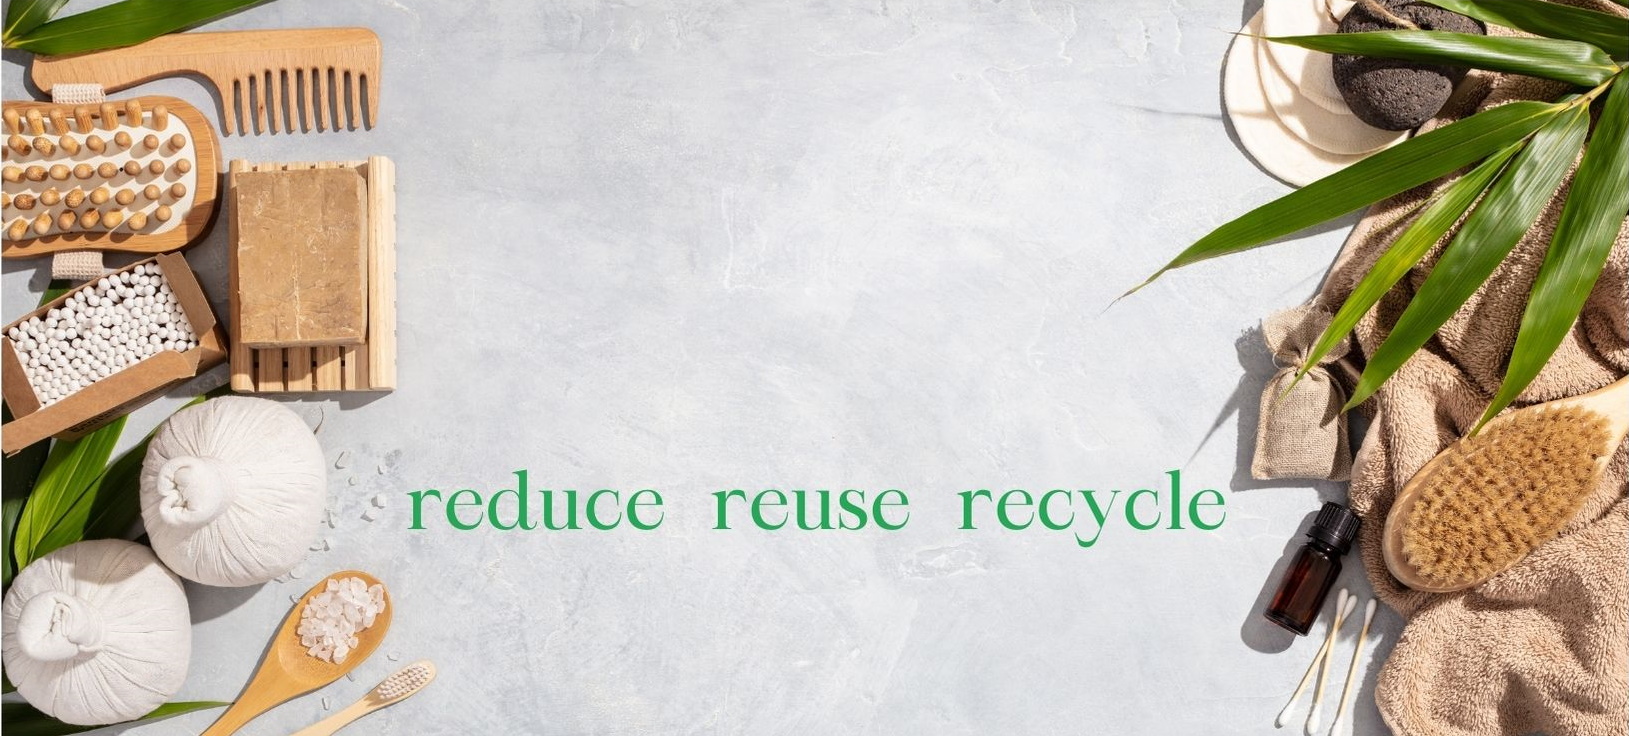 reduce. reuse. recycle.